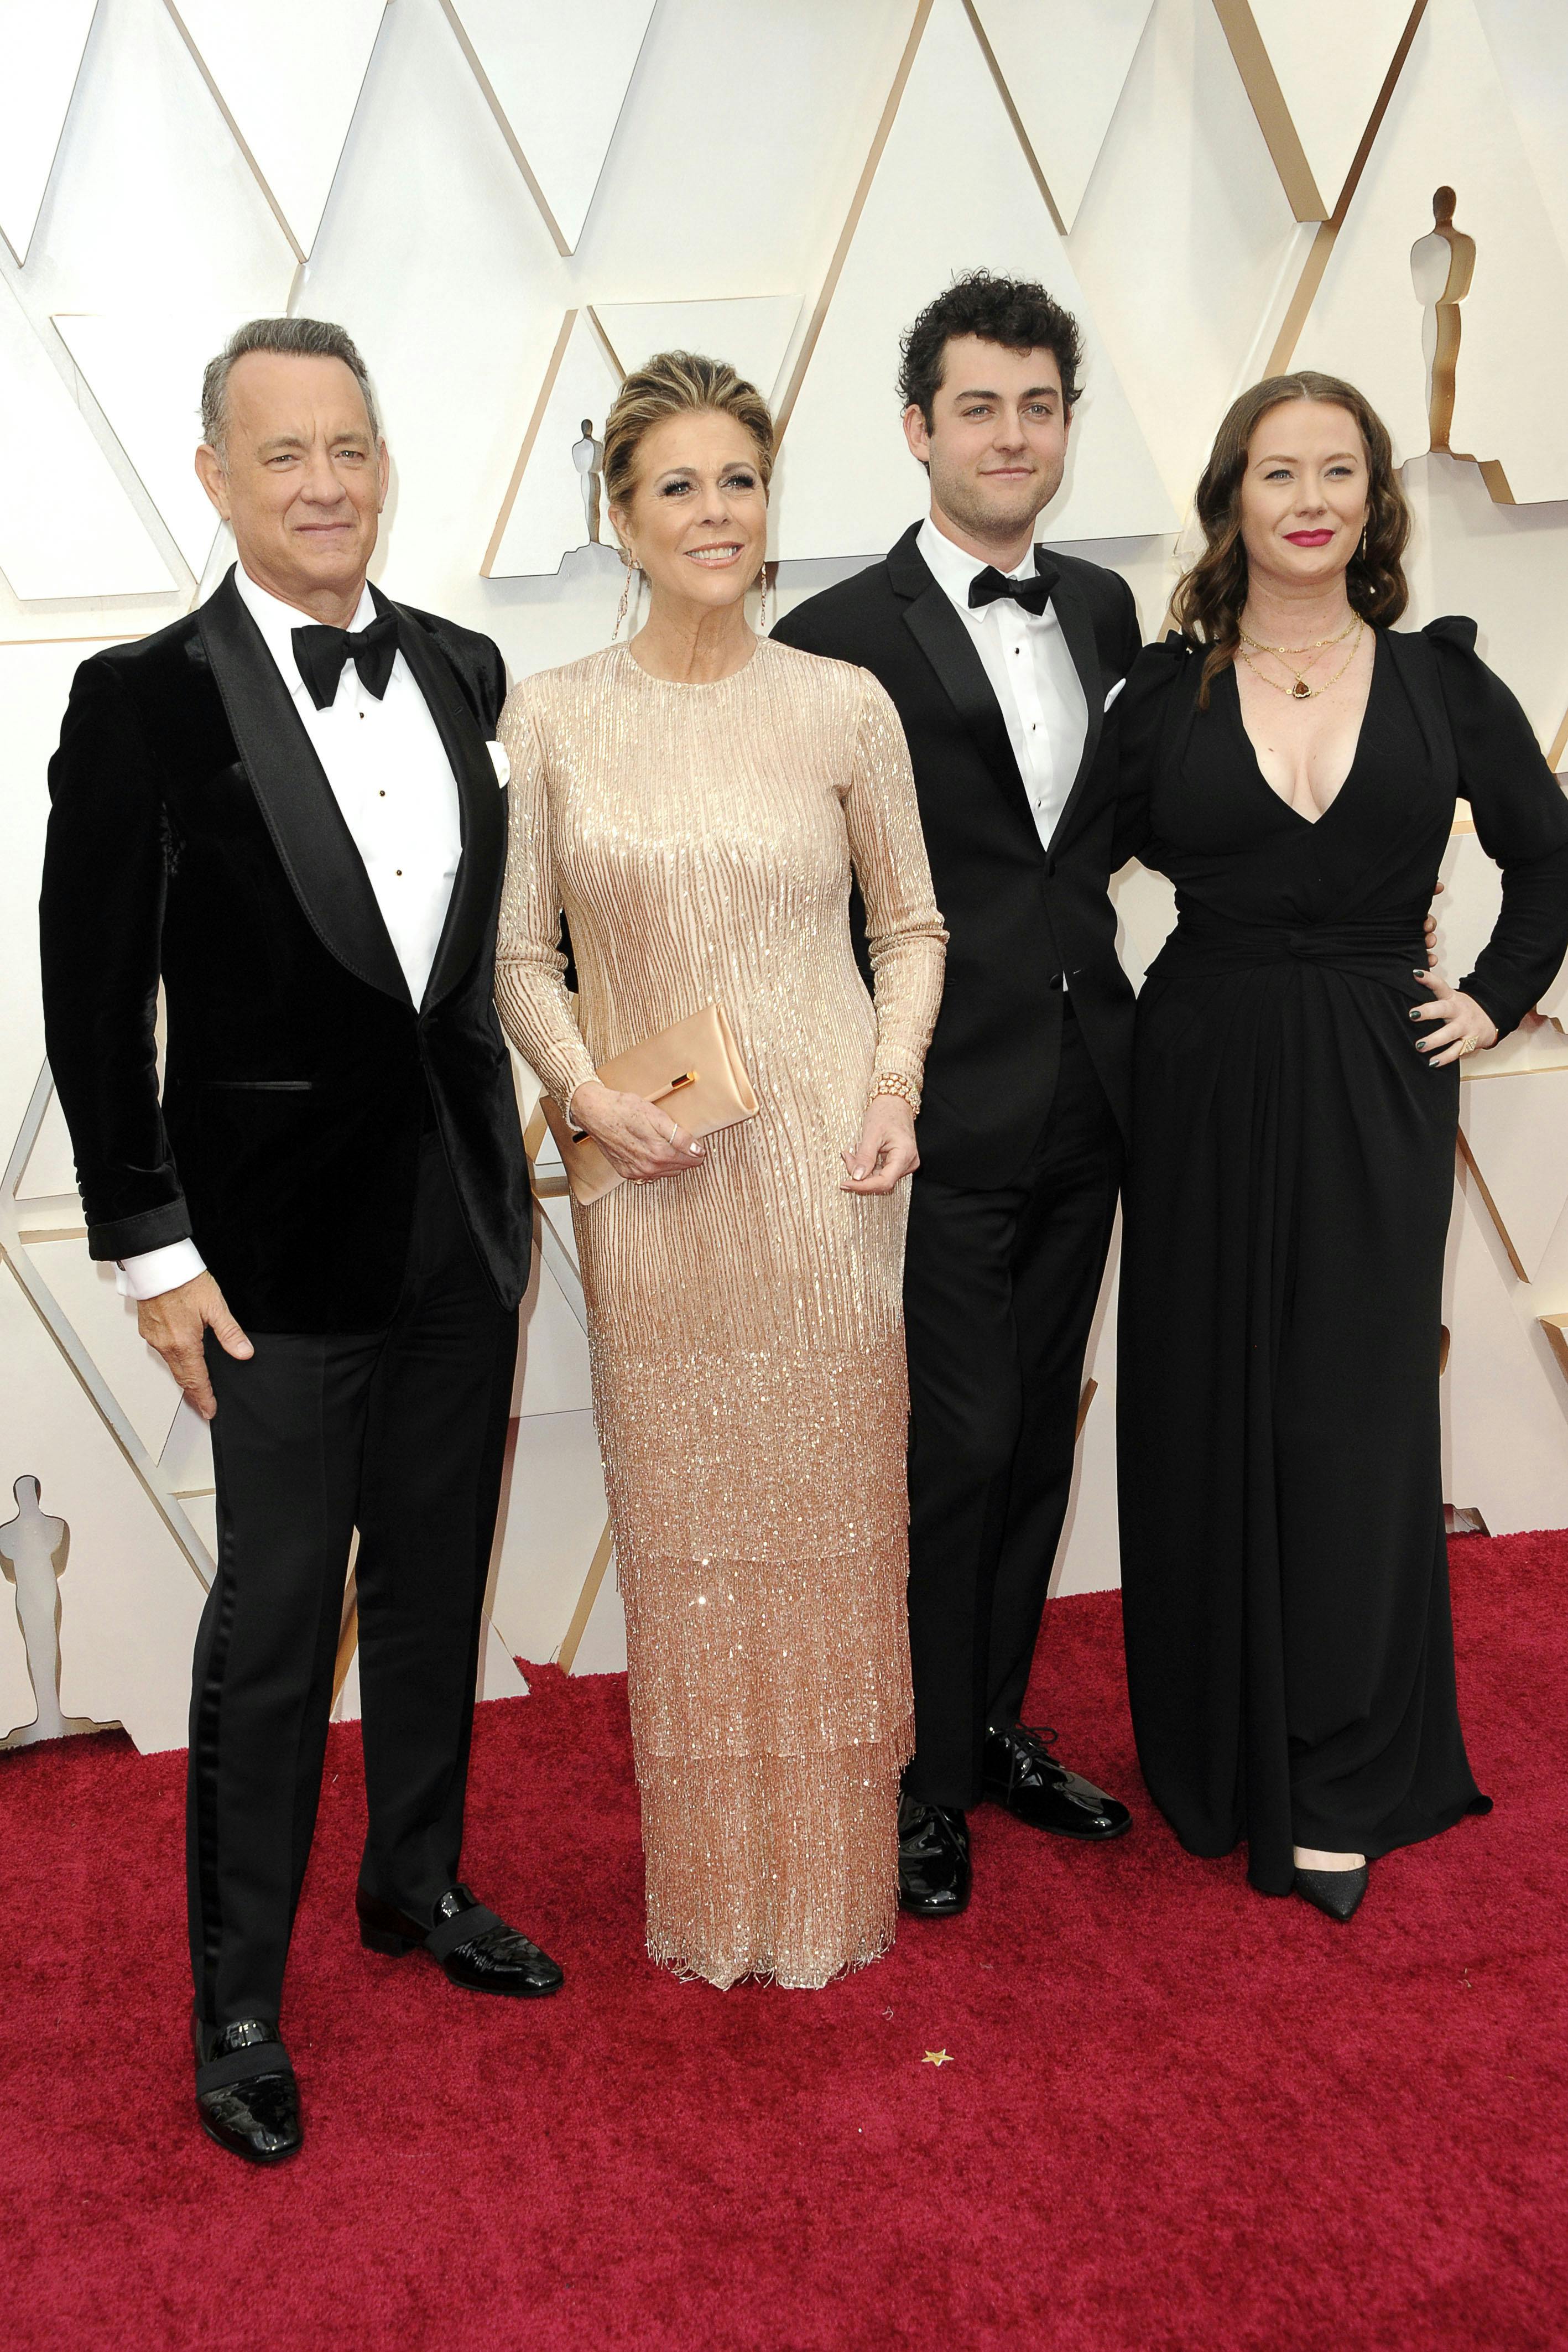 Tom Hanks, Rita Wilson, Truman Theodore Hanks and Elizabeth Hanks at the 2020 / 92nd Annual Academy Awards Academy Awards at the Dolby Theater at the Hollywood & Highland Center. Los Angeles, February 9, 2020 | usage worldwide Photo by: Dave Bedrosian/Geisler-Fotopress/picture-alliance/dpa/AP Images